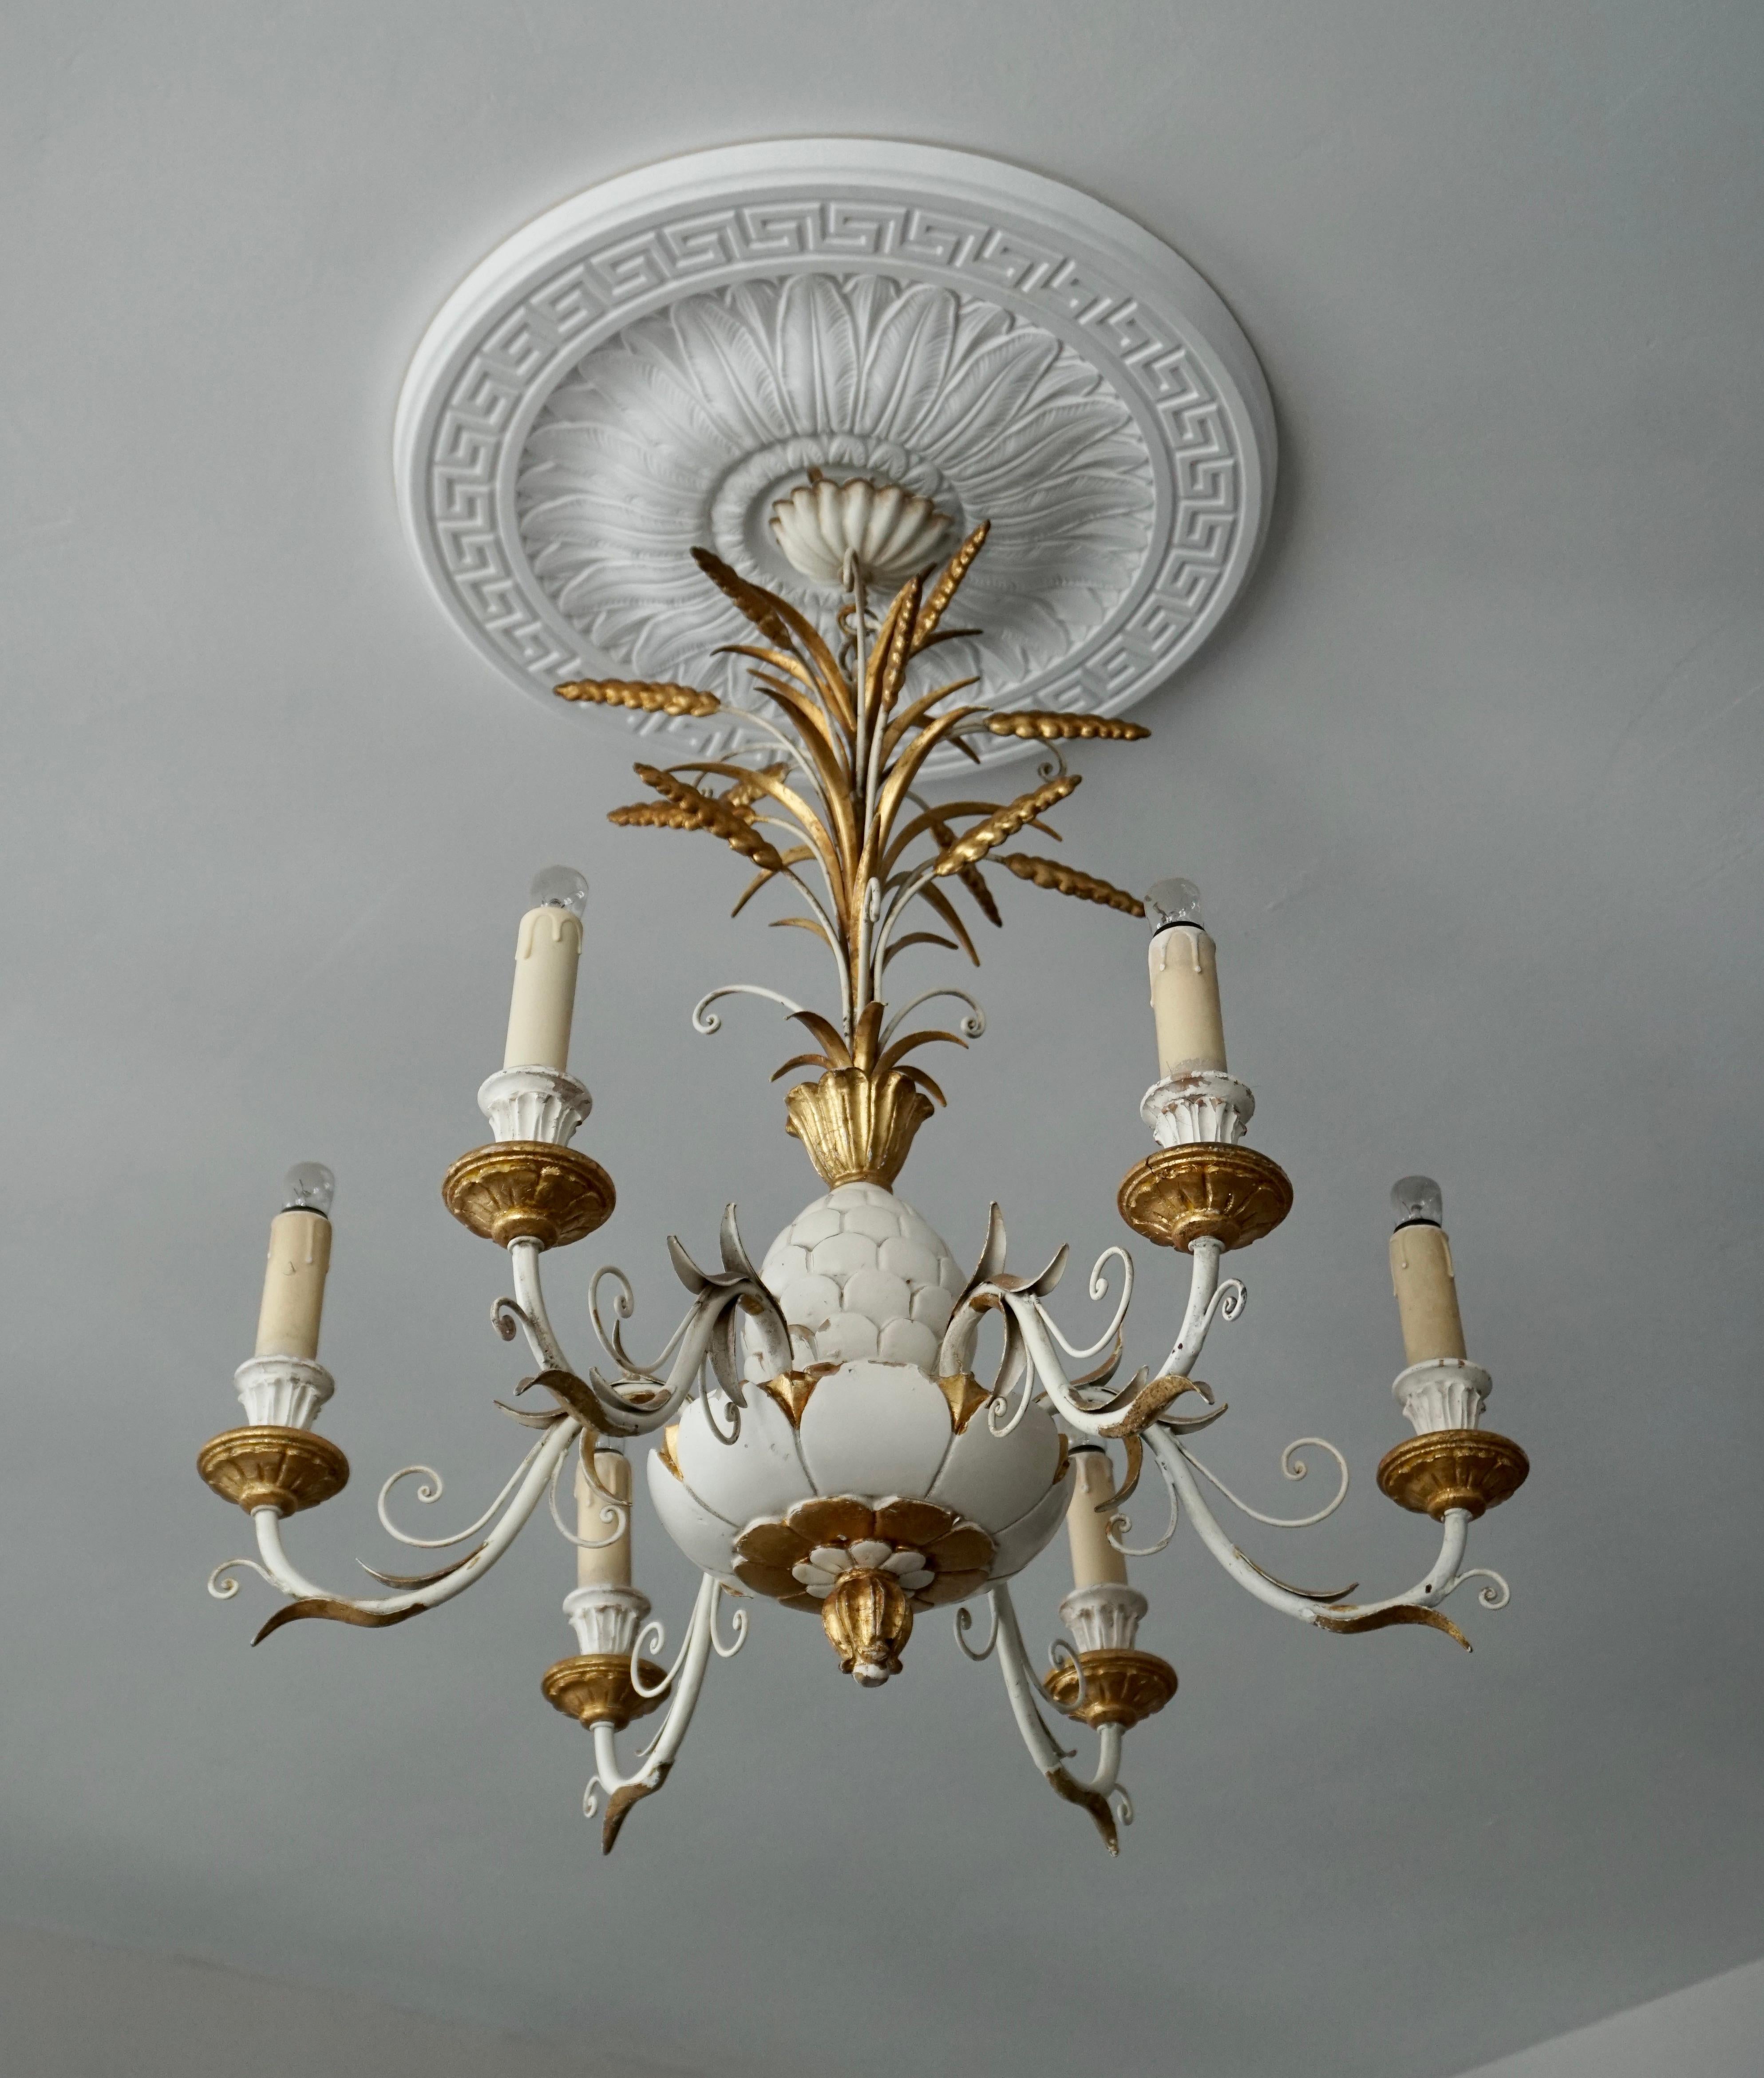 Six light chandelier crafted in wood and gilt and white painted metal in a classic composition with leaves fronds at the top over a tole pineapple. 

Diameter 25